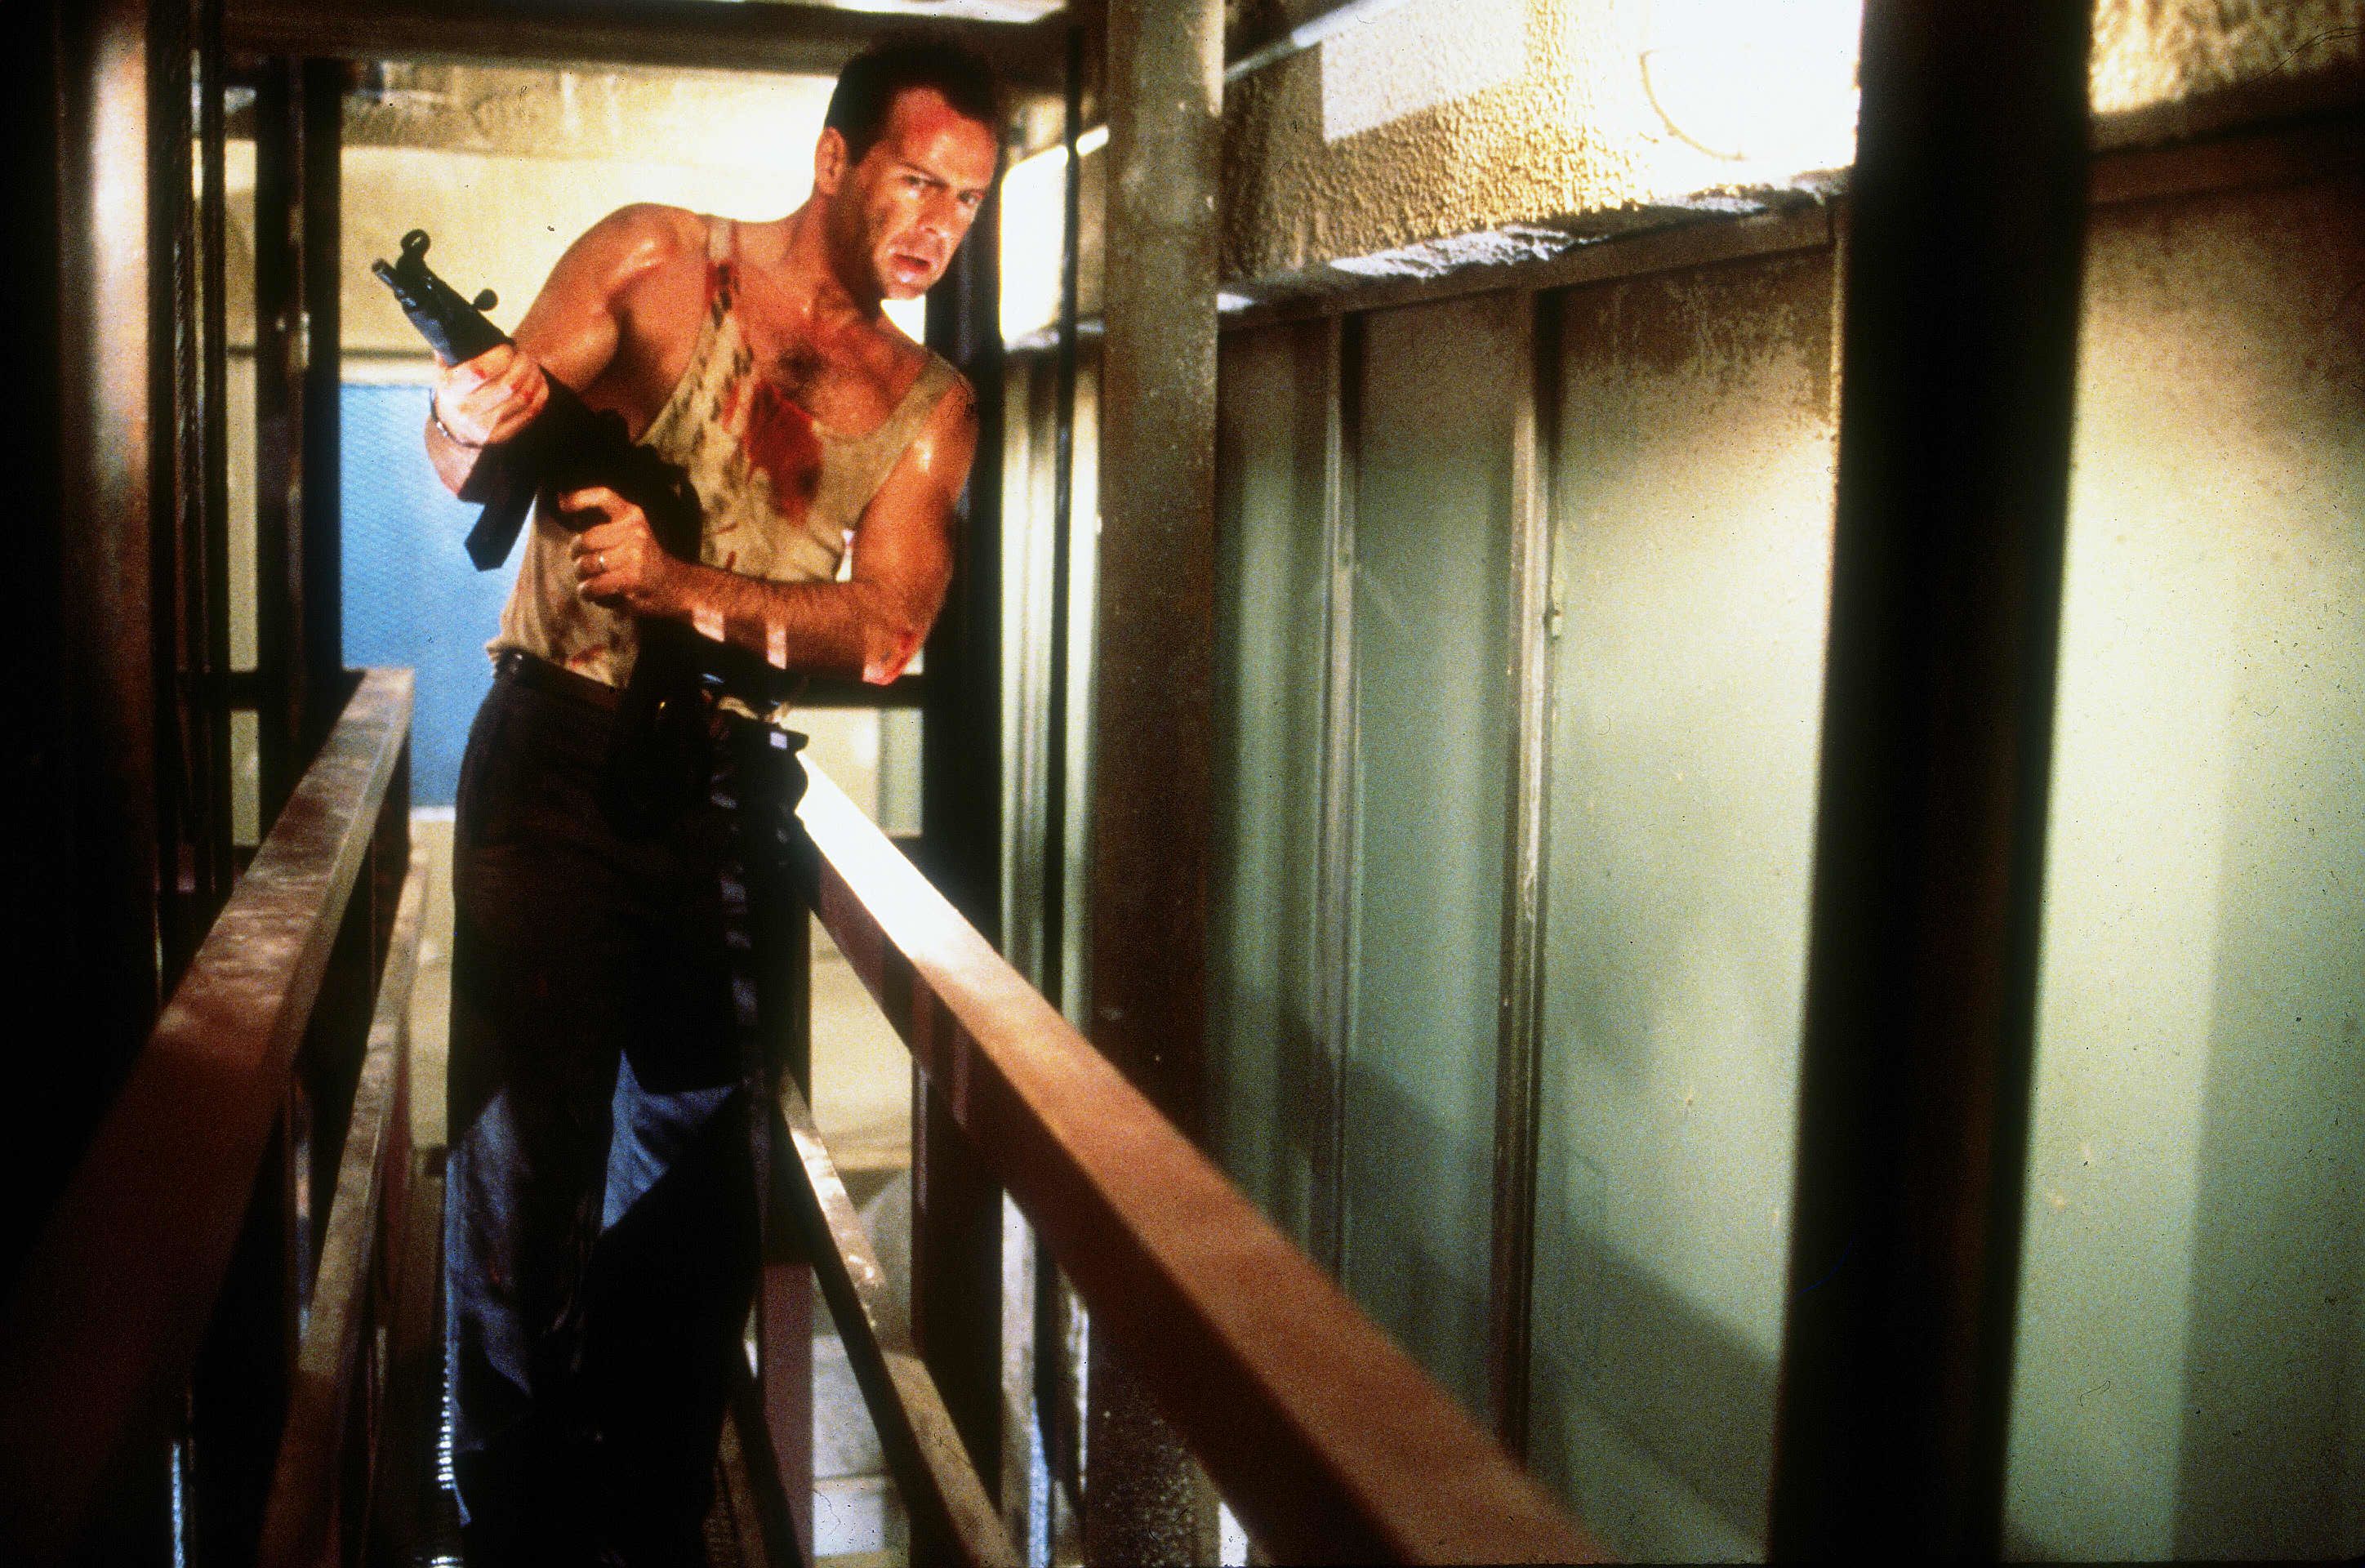 Remember when Bruce Willis' 'Die Hard' character fought terrorists